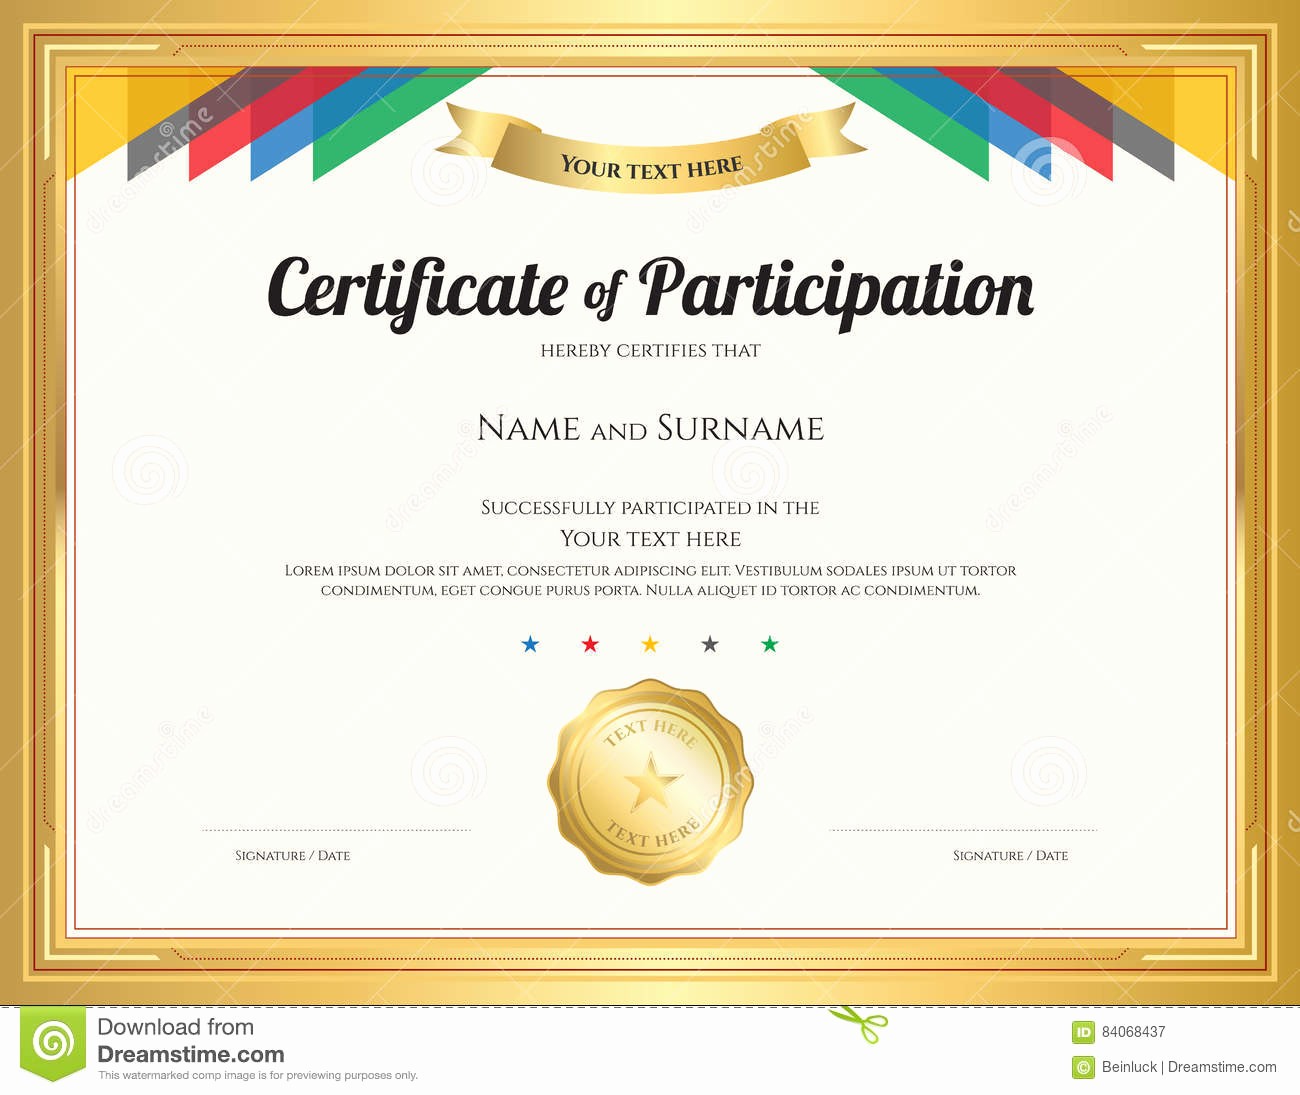 Certificate Of Participation for Kids Awesome Certificate Participation Template In Gold Color Vector